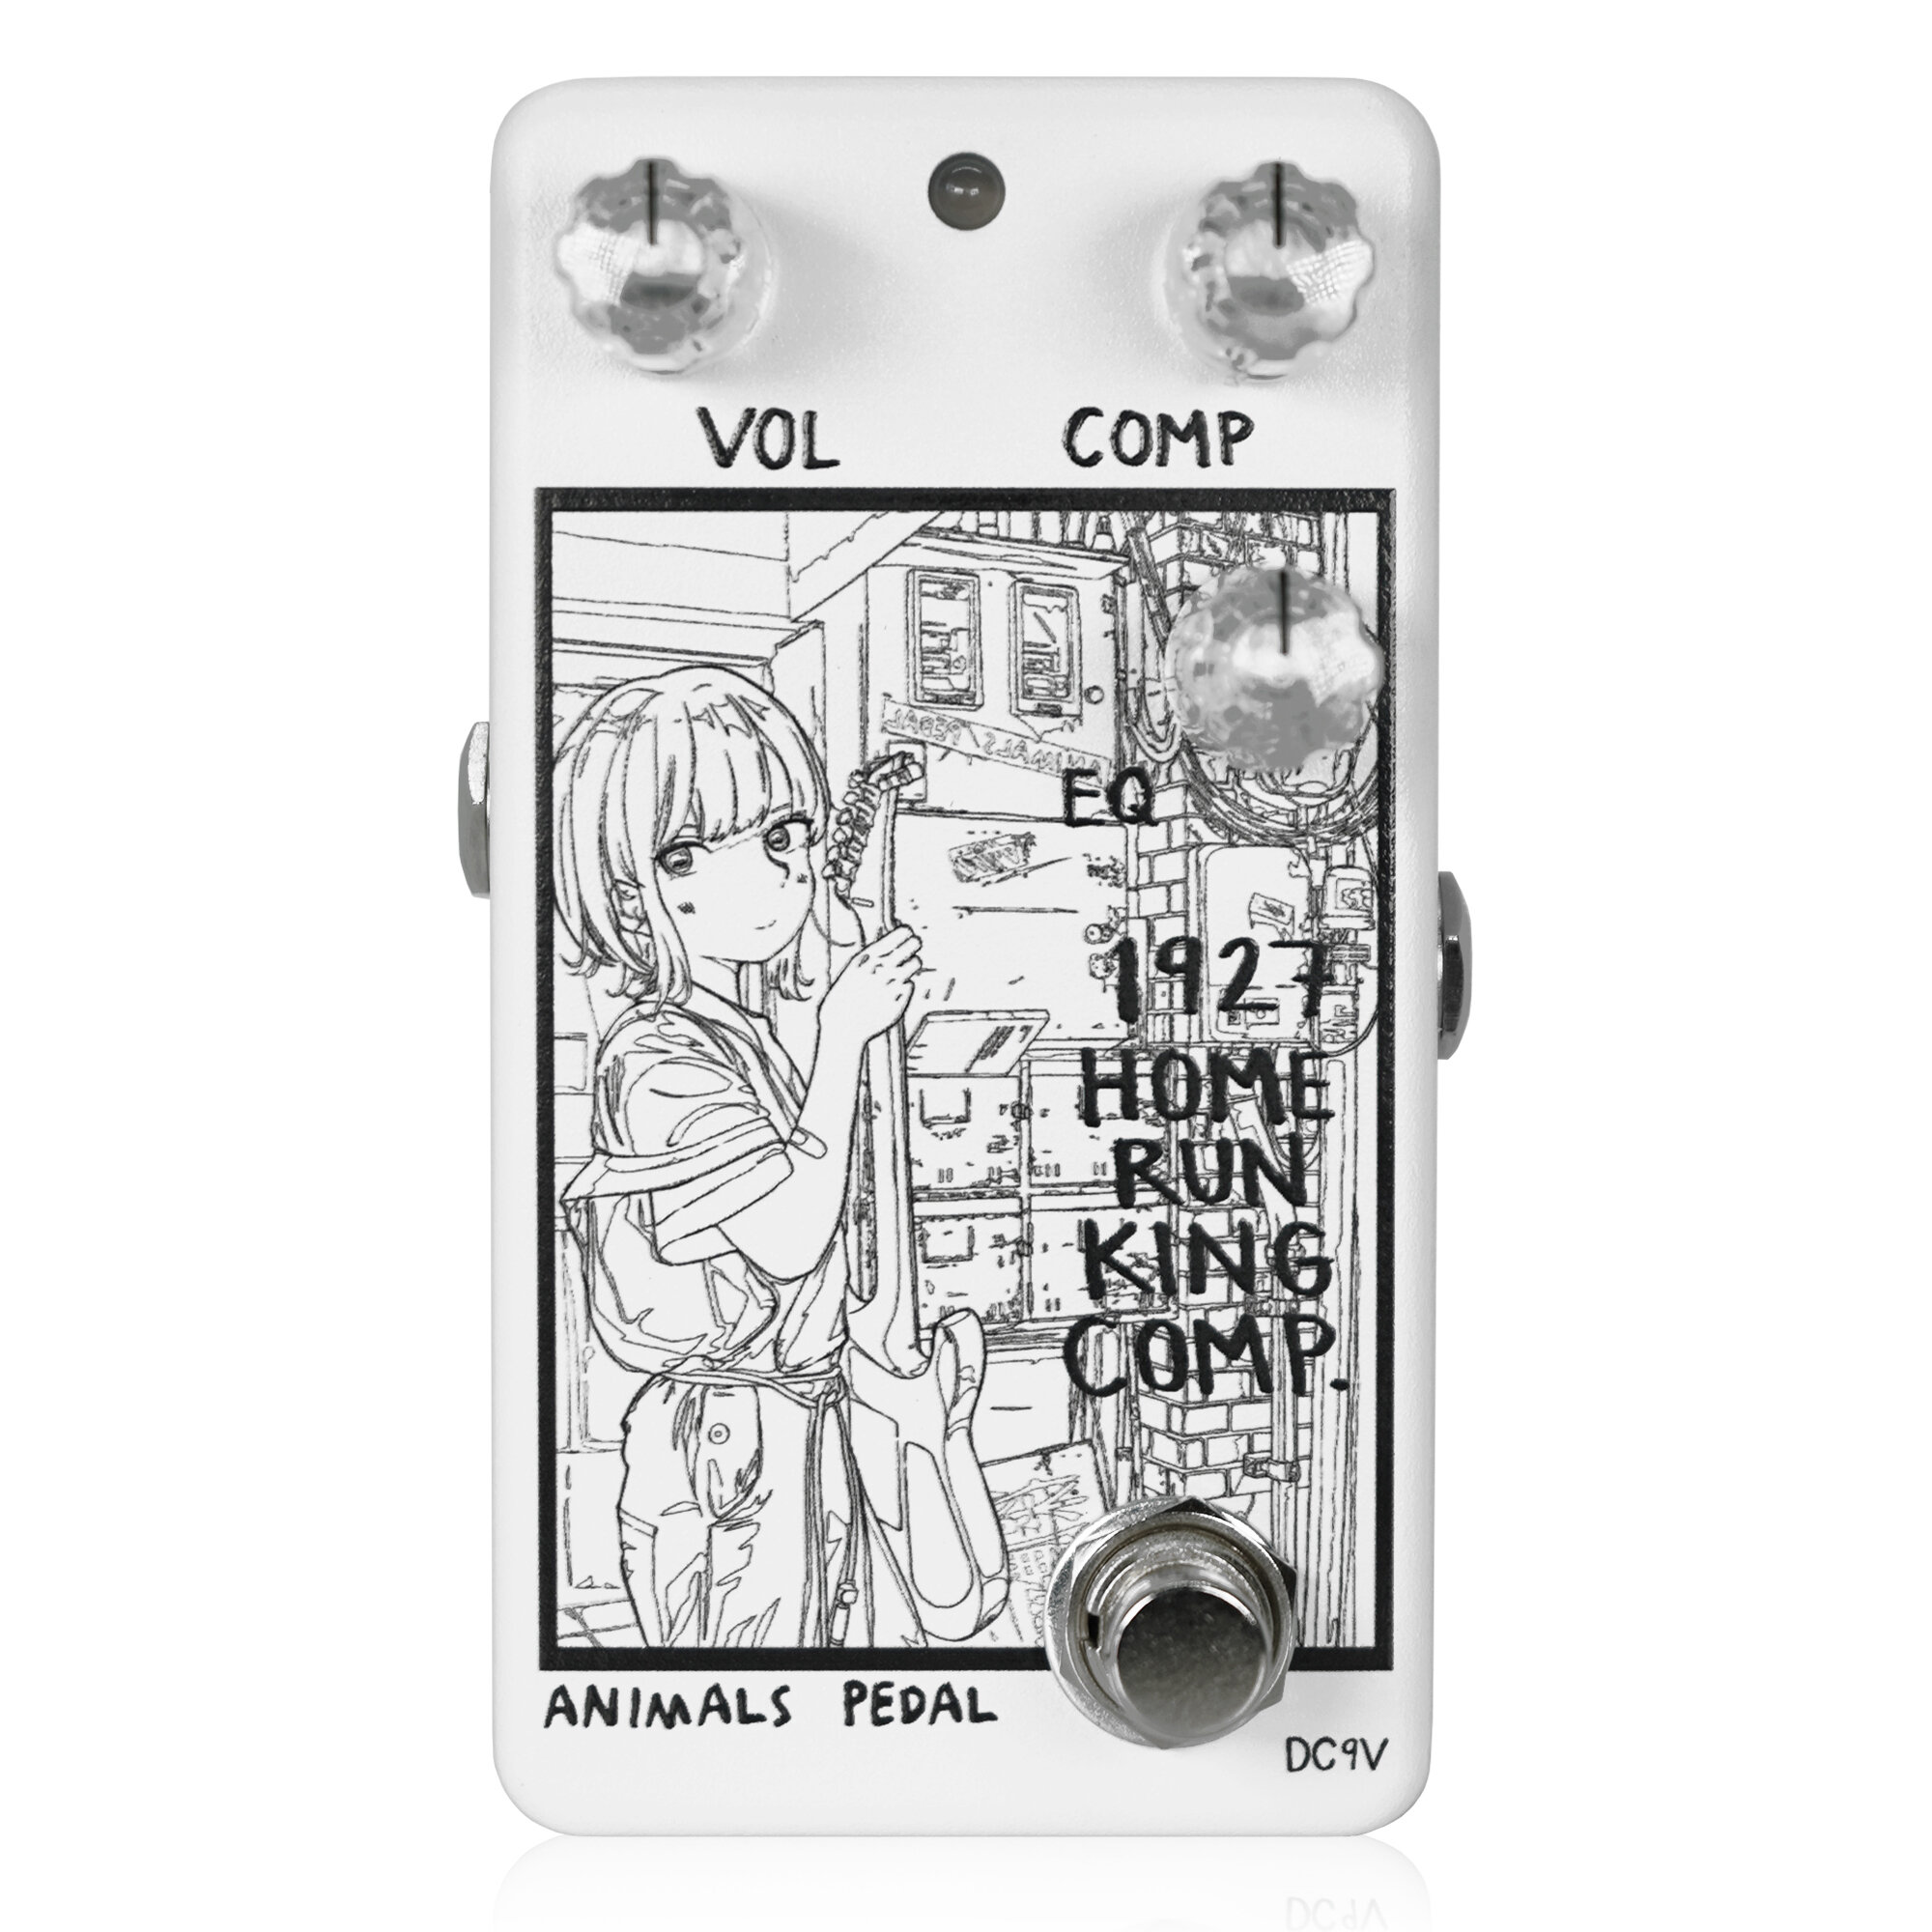 Animals Pedal / Custom Illustrated 033 1927 Home Run King Comp. by 